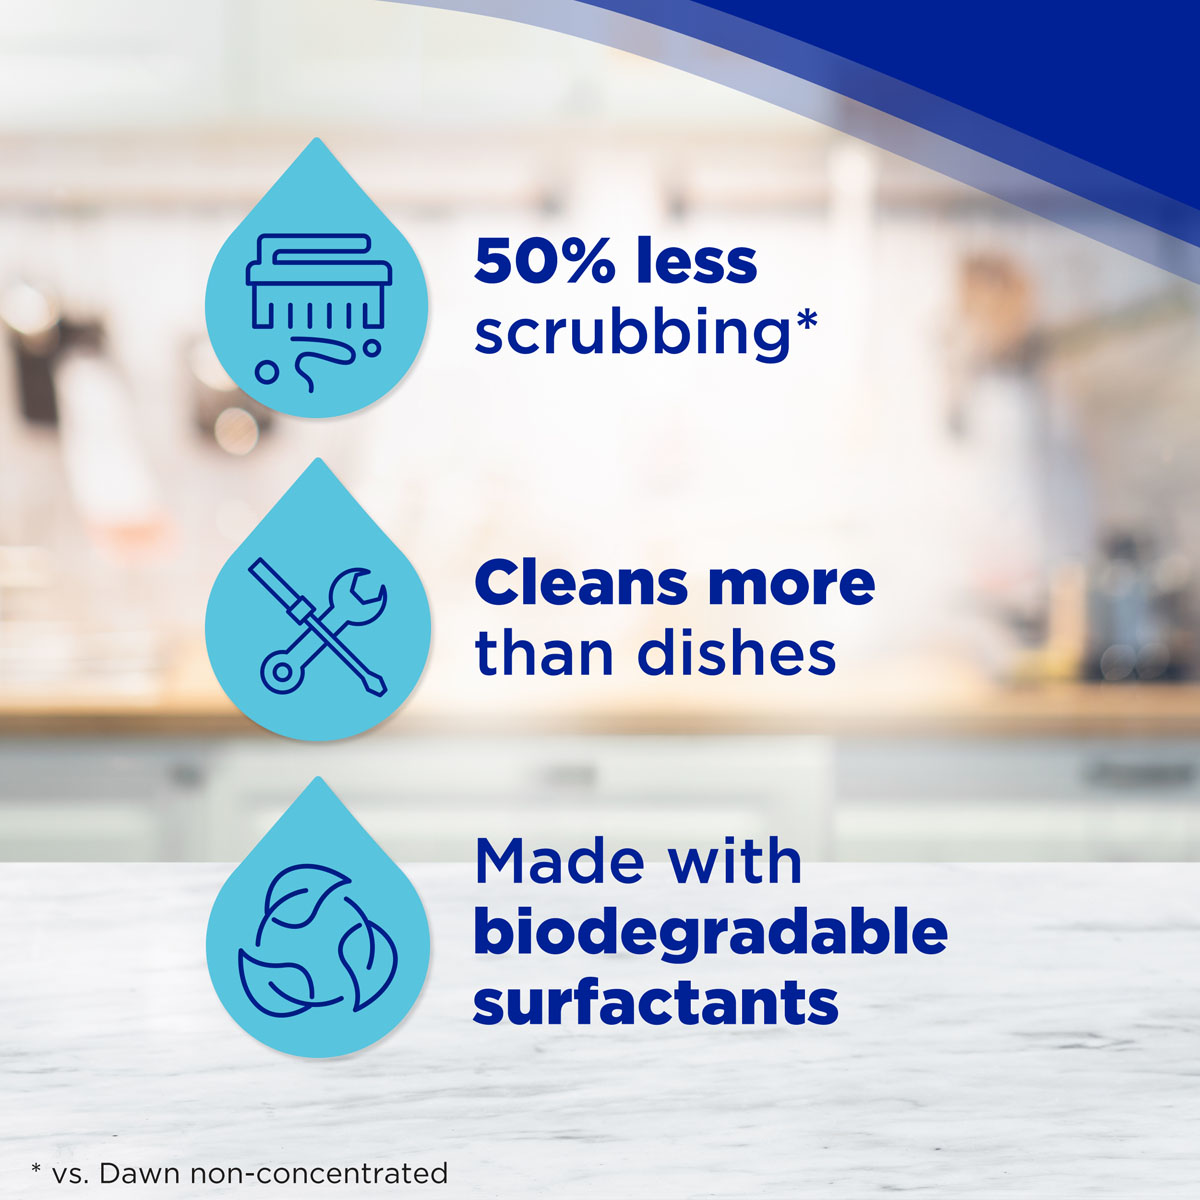 50% less scrubbing, cleans more than dishes, made with biodegradable surfactants